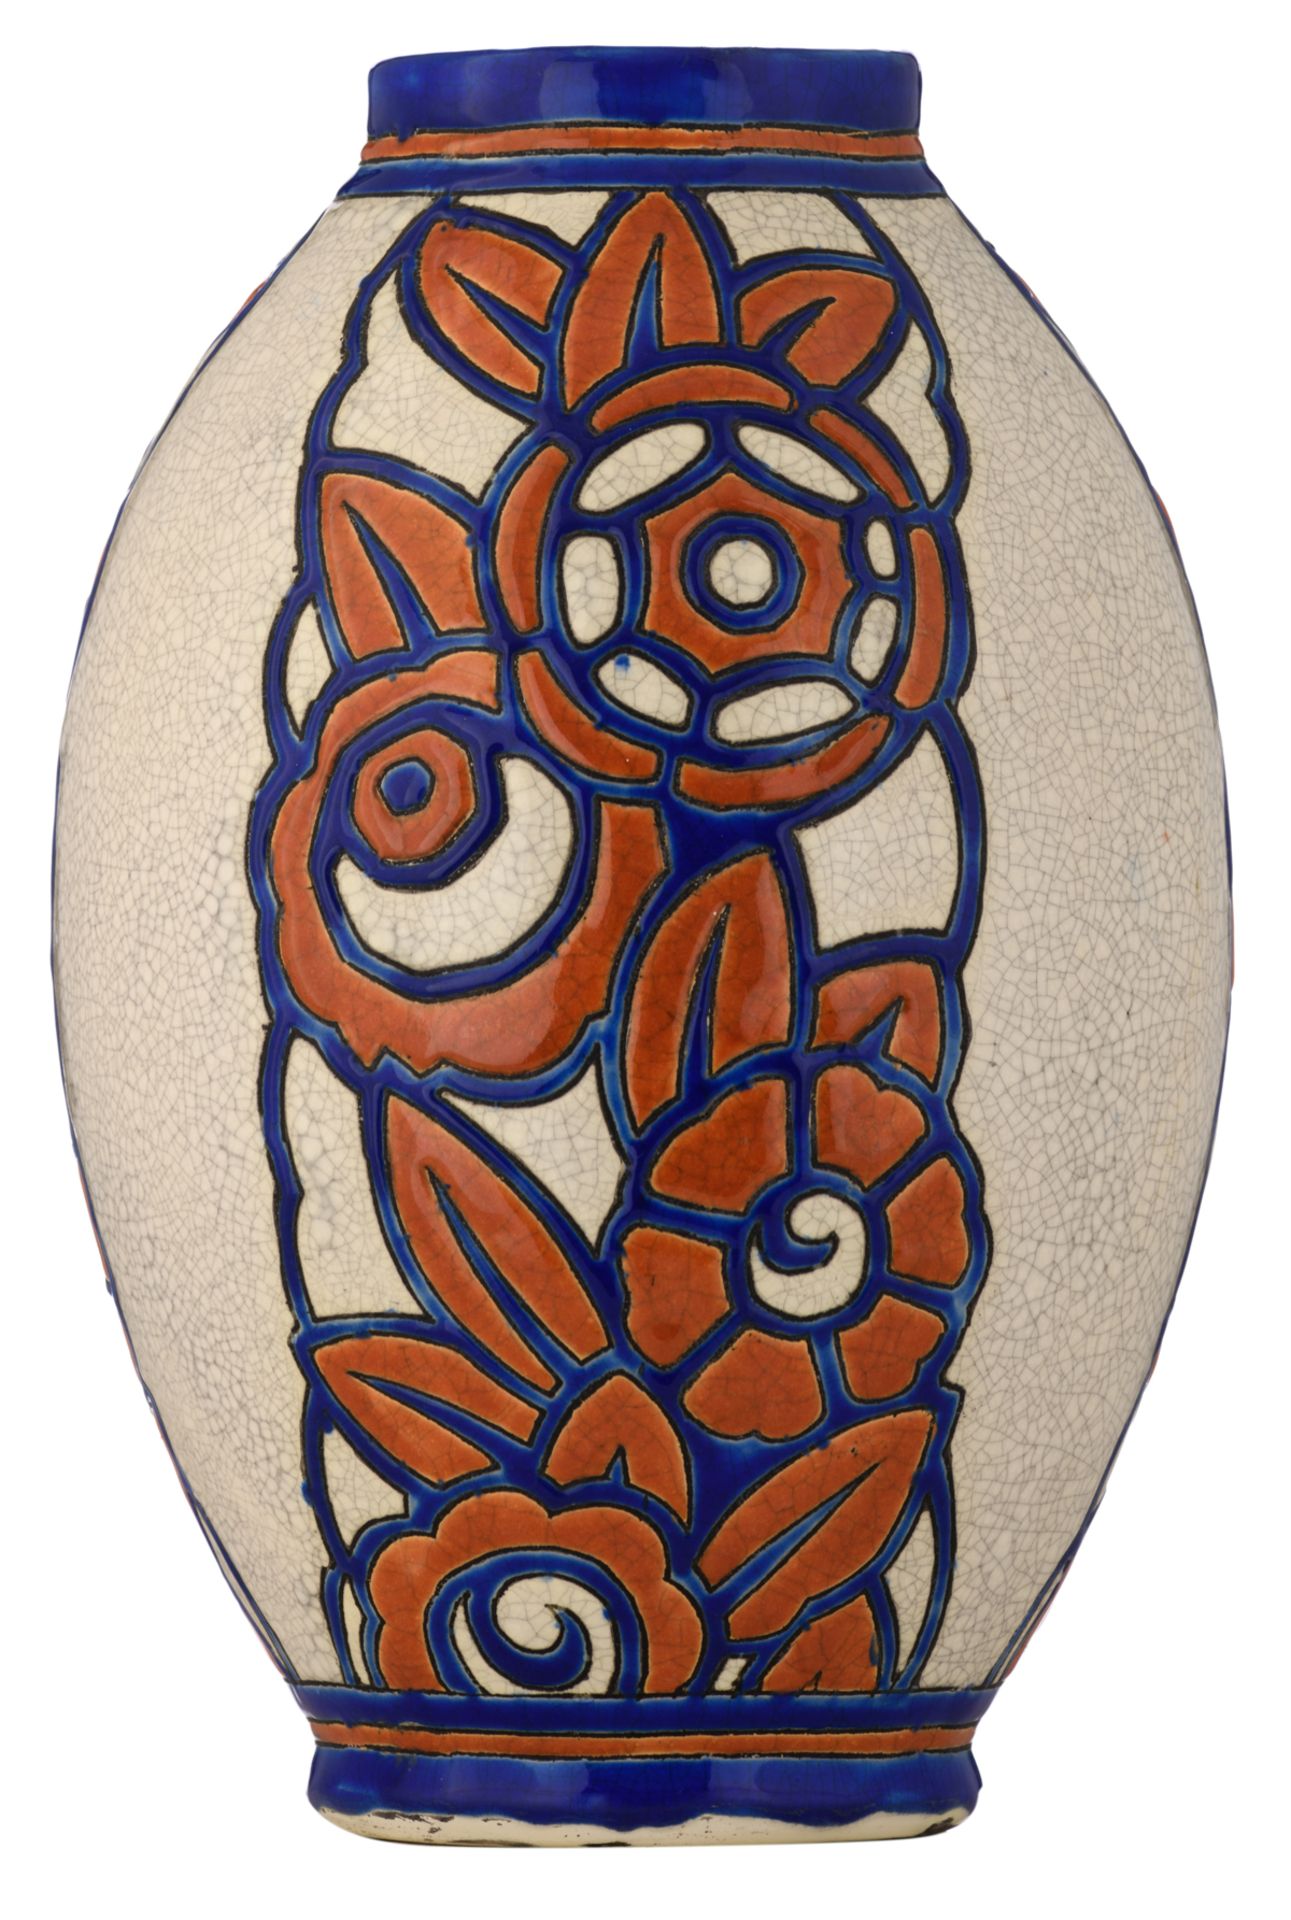 A polychrome decorated 1920s earthenware vase made by Boch - La Louvière in the Charles Catteau